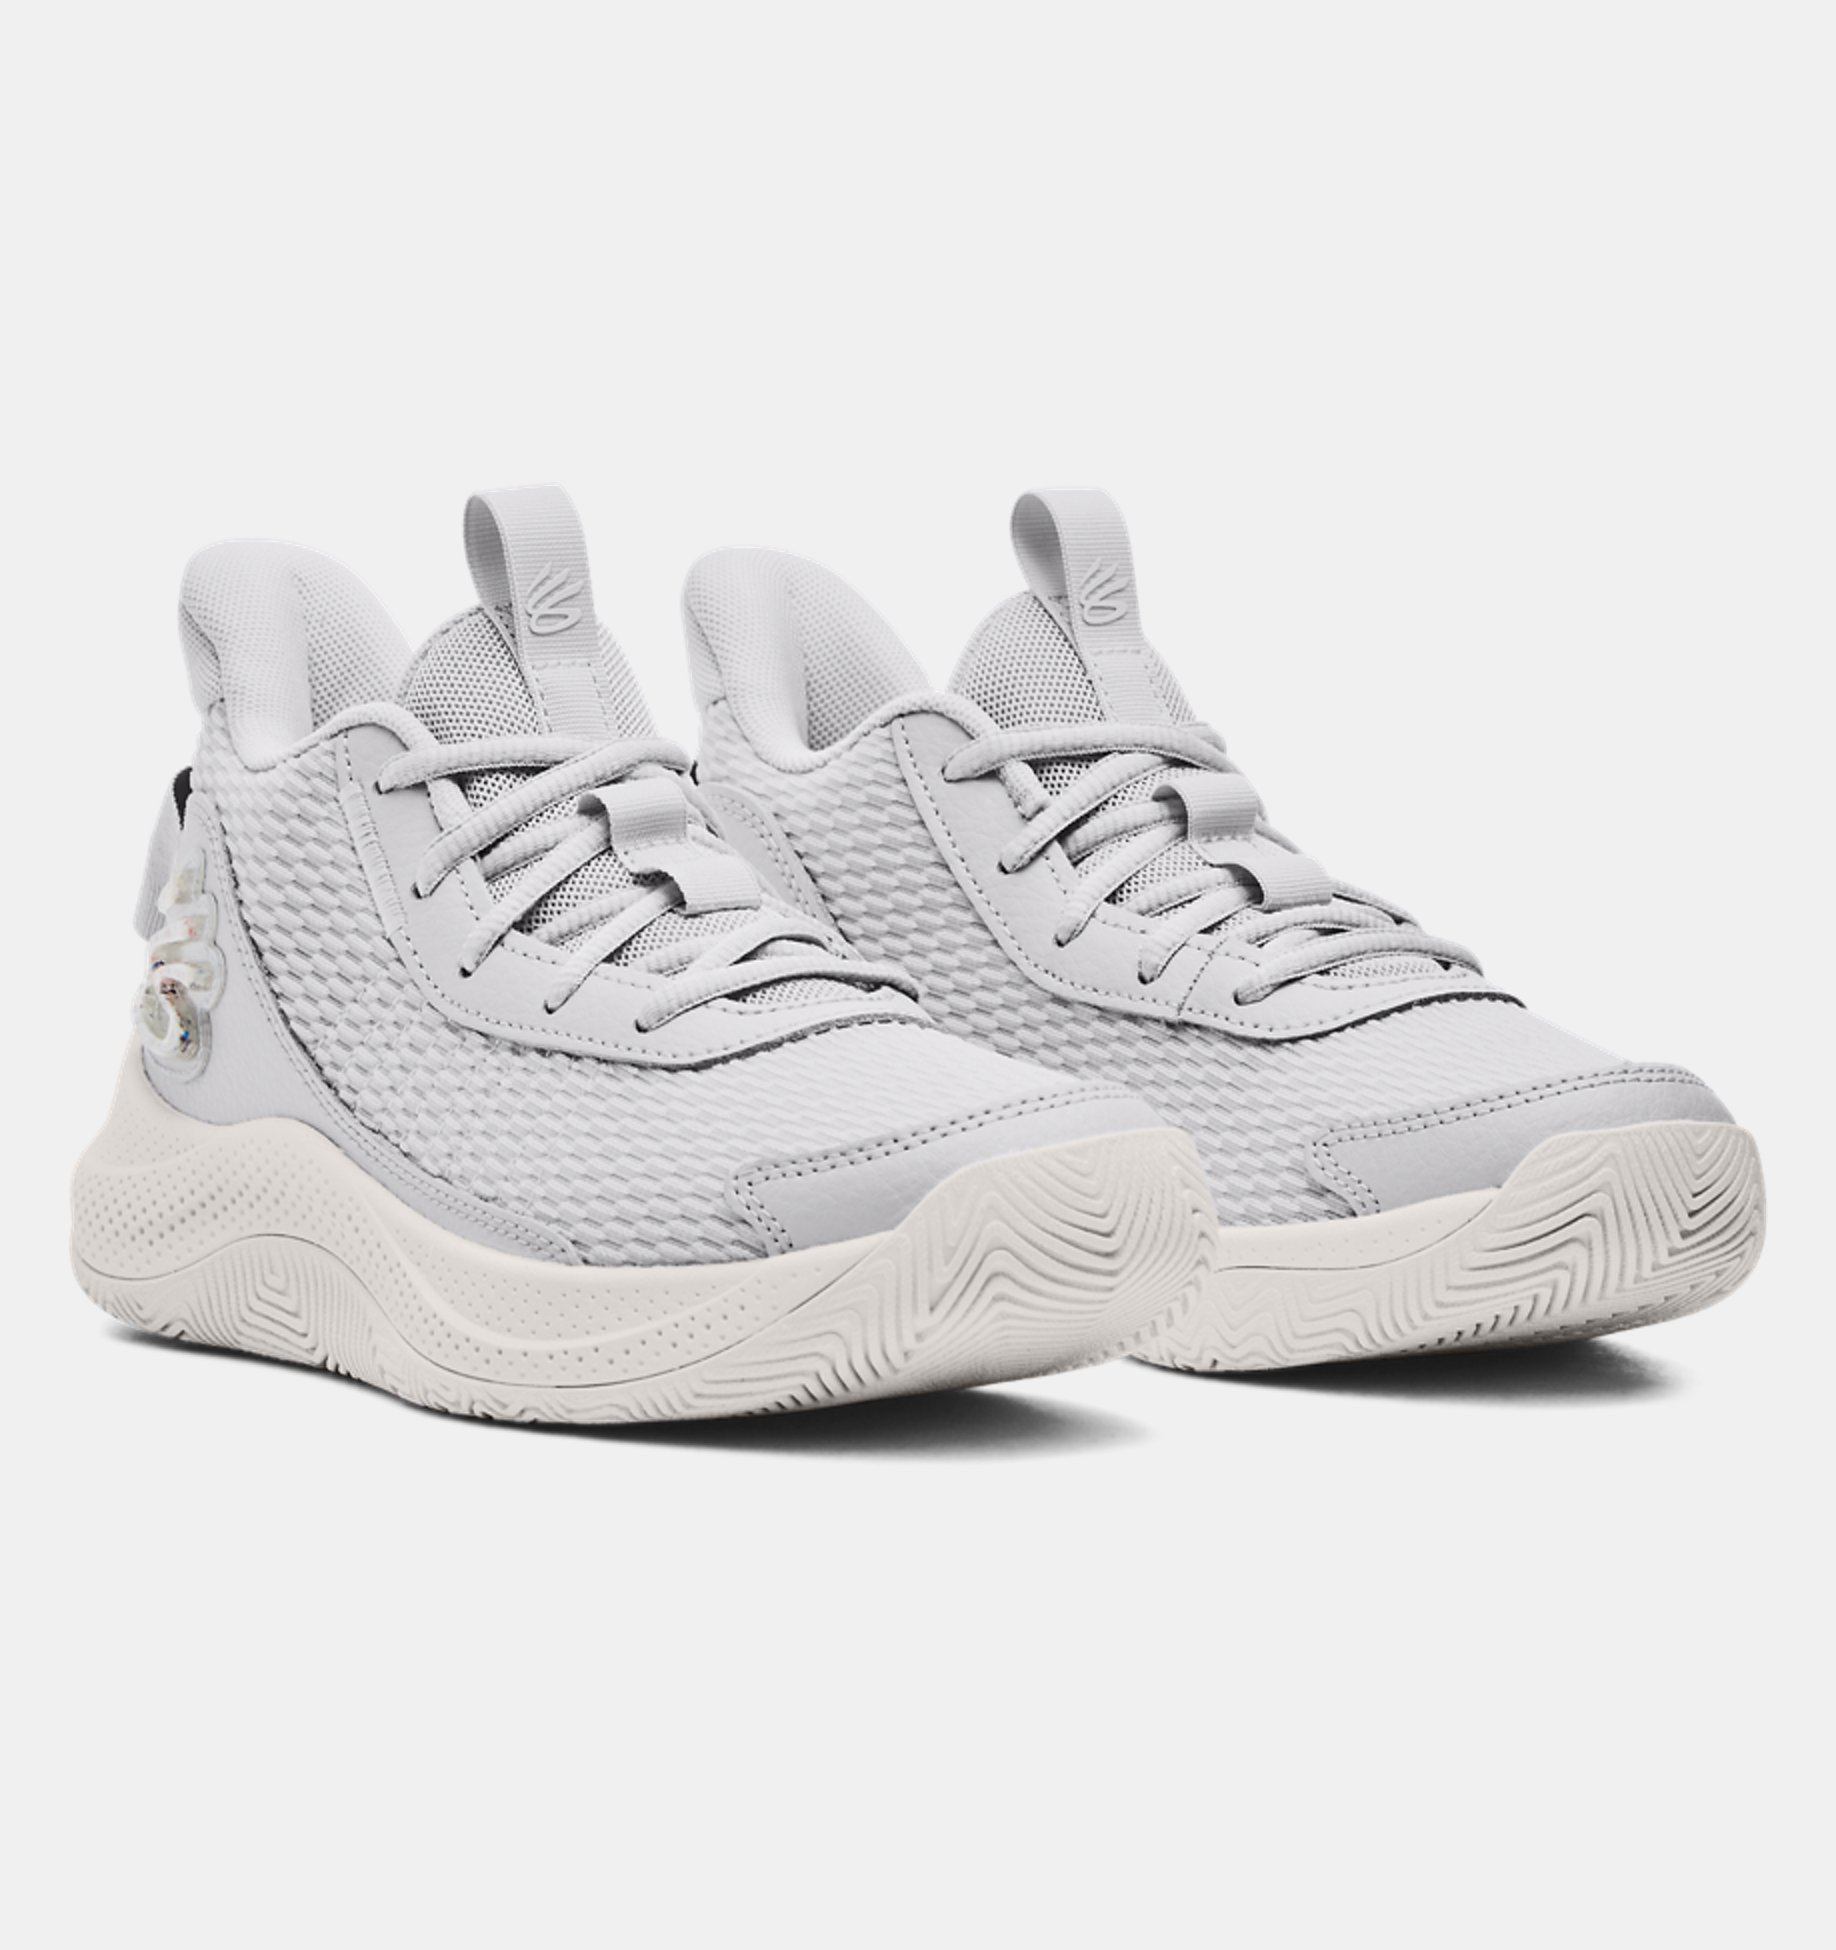 Grade School Curry 3Z7 Basketball Shoes | Under Armour